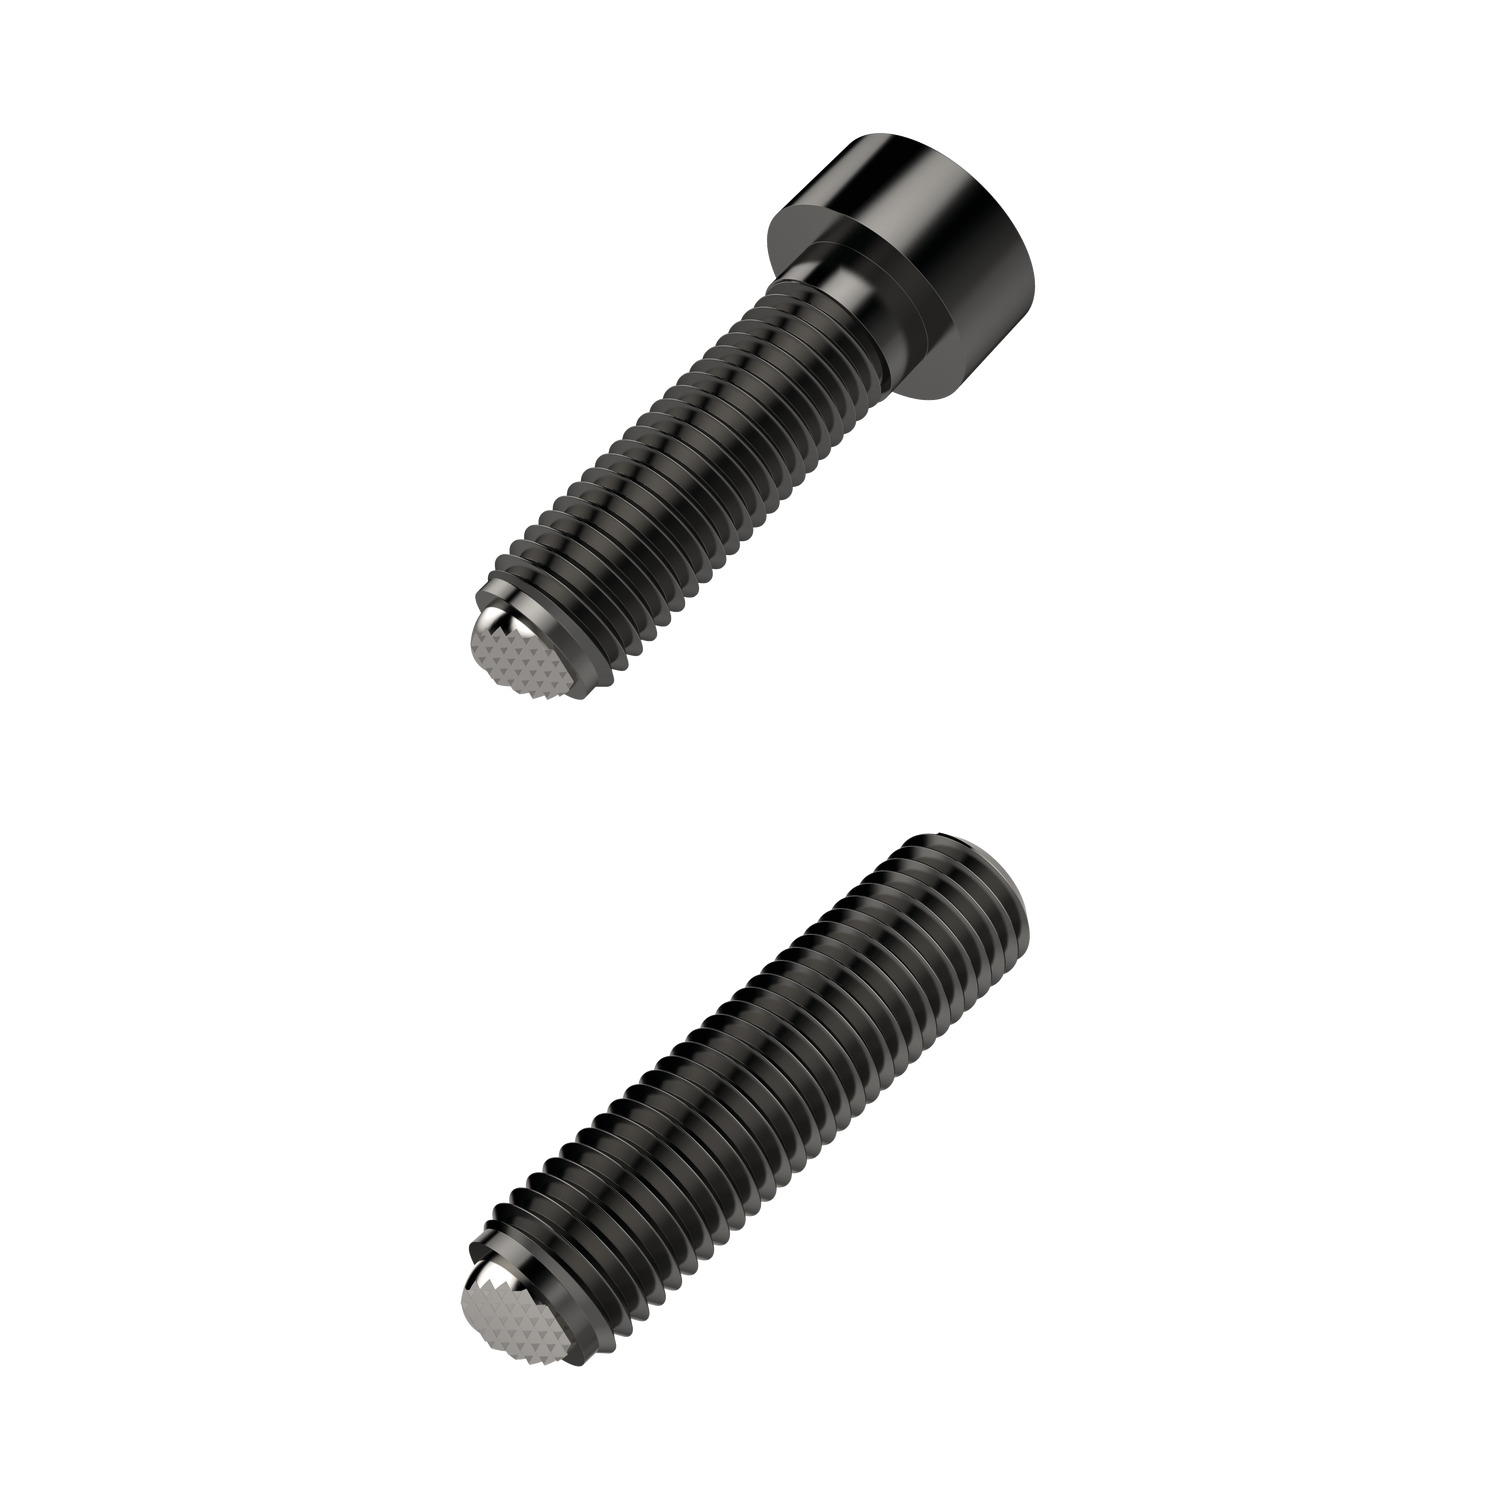 Thrust Screws - Steel Headed and headless thrust screws in steel and all balls come secured against full rotation. Includes round, flat and ribbed ended balls.